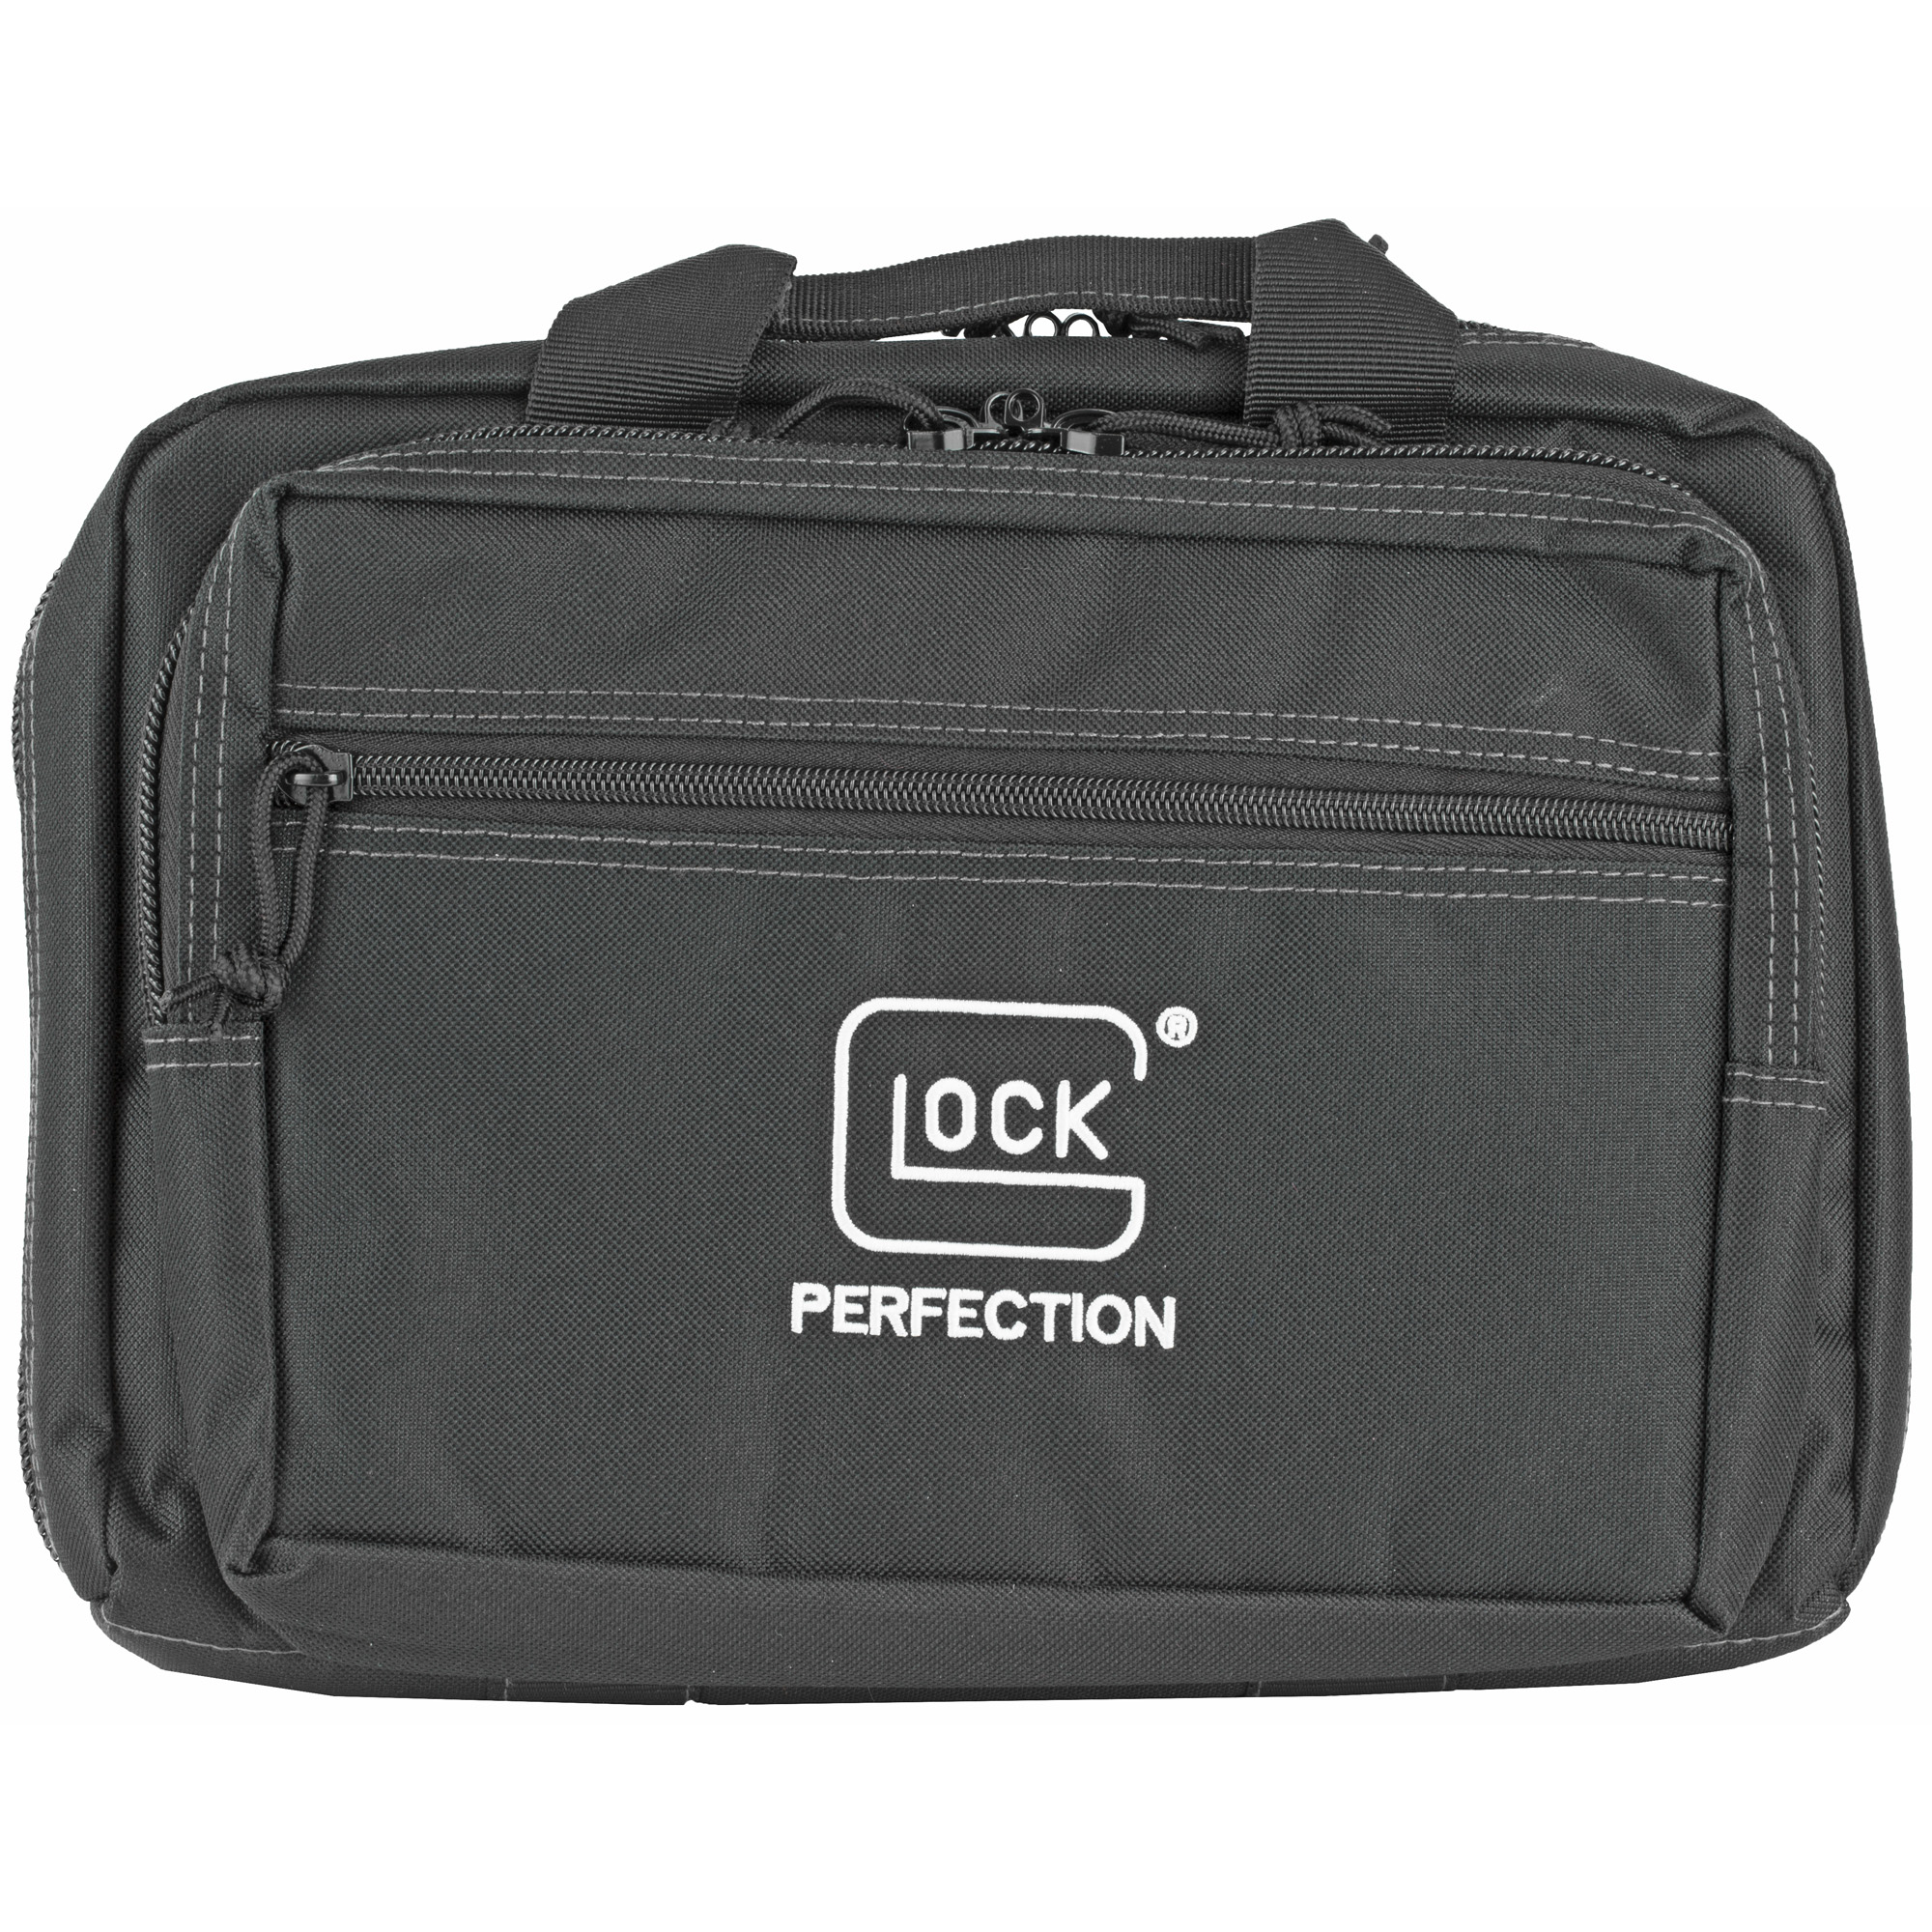 Glock Double Pistol Case with Gray Finish, 5 Internal Mag Holders & Carry Handle (AP60301)